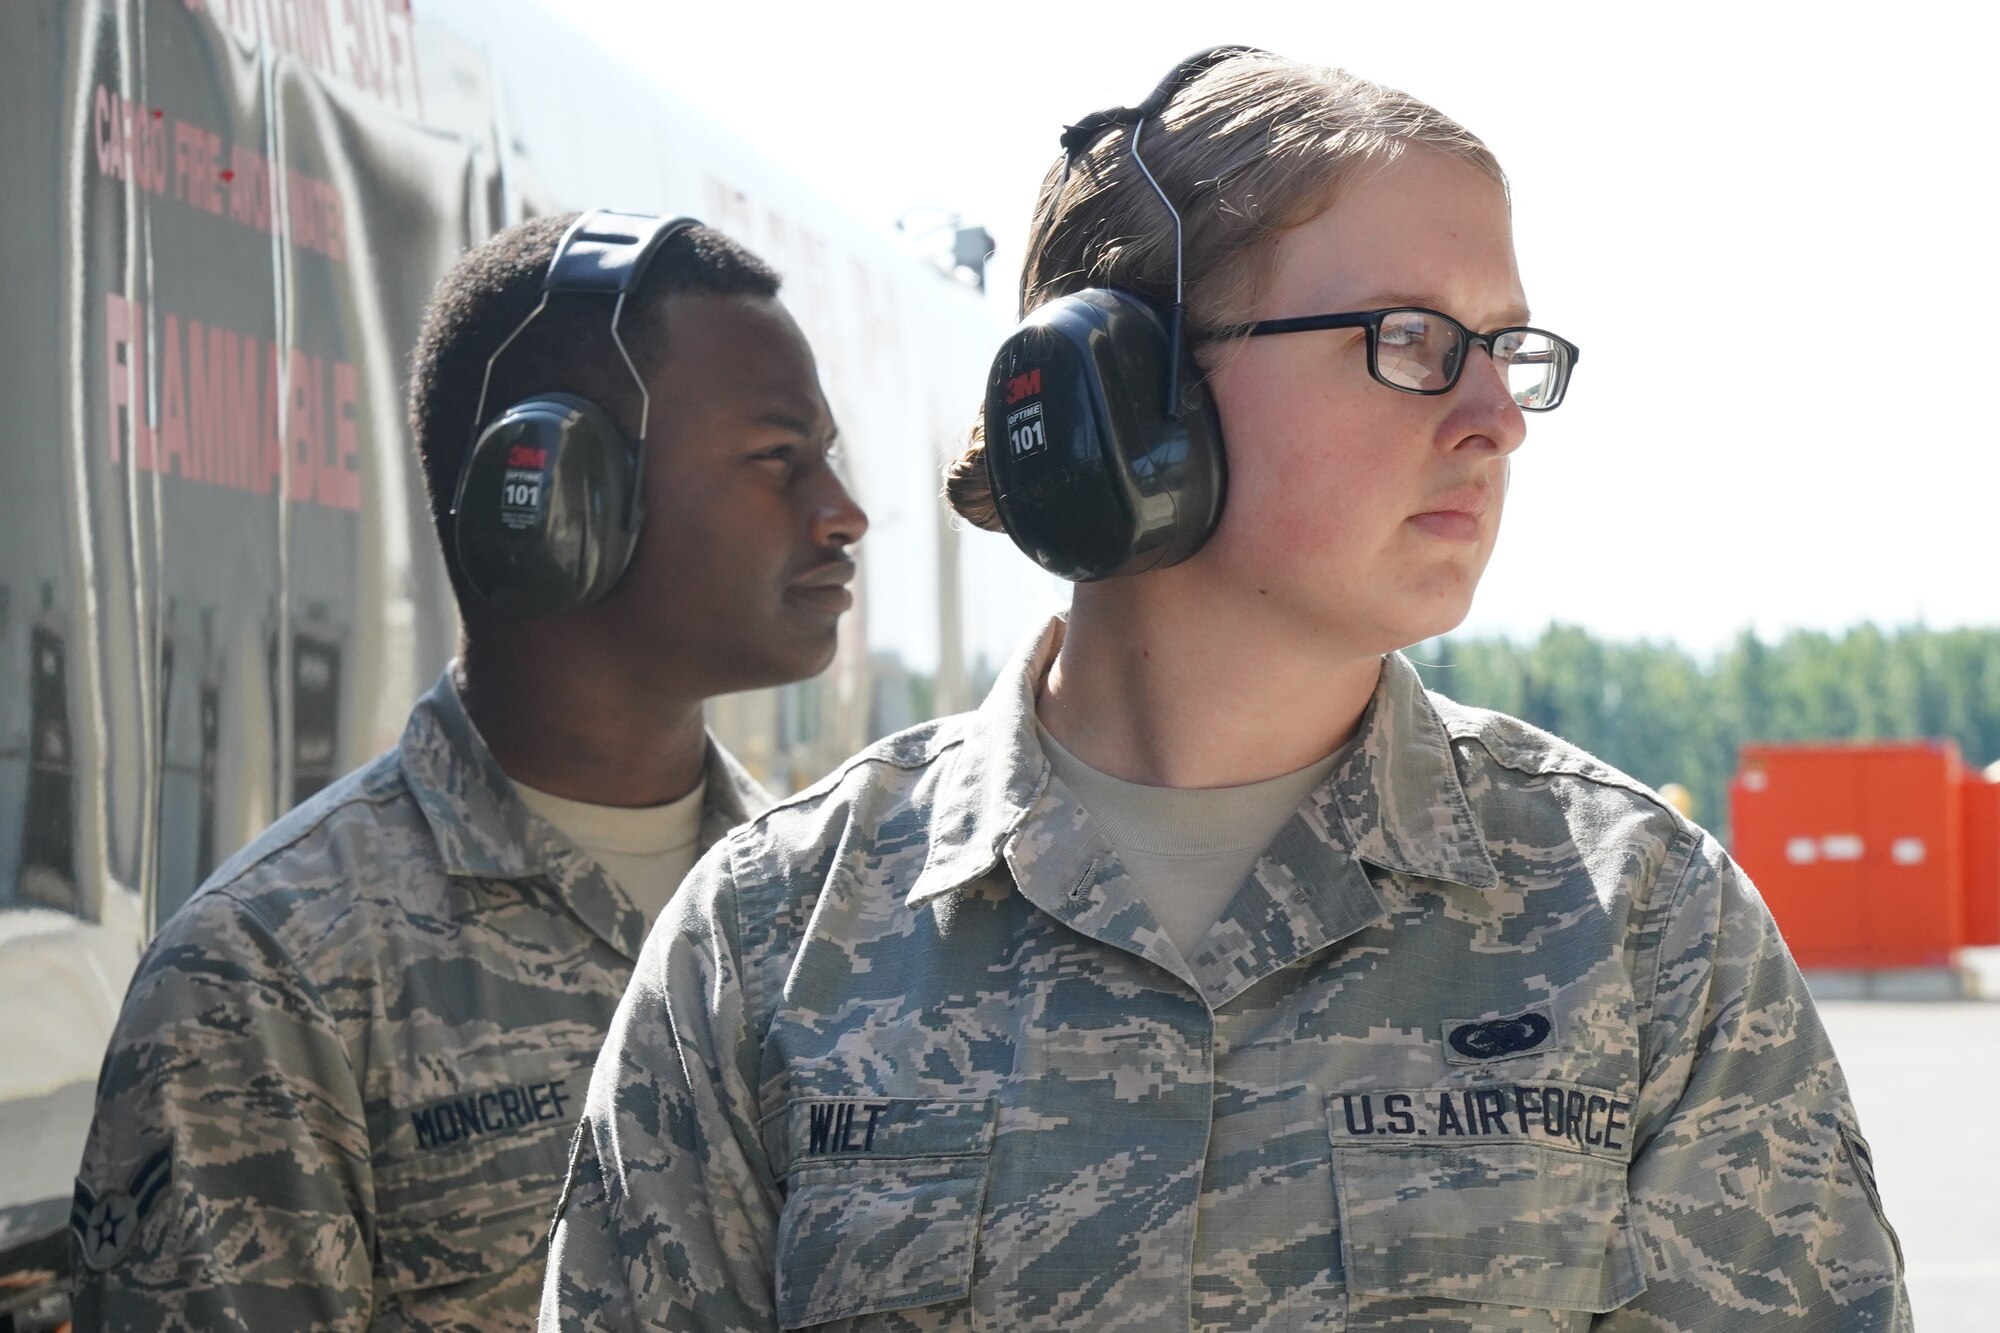 Senior Airman Jessica Wilt, right, and Airman 1st Class Anthony Moncrief, both assigned to the 673d Logistics Readiness Squadron, refuel an F-22 Raptor of the 525th Fighter Squadron (the Bulldogs) on Joint Base Elmendorf-Richardson, Alaska, Aug. 9, 2019.  Fuels specialists manage every aspect of the refueling every aircraft on the flight line and are responsible for operating the vehicles, equipment and storage facilities that are essential to refueling operations while ensuring compliance with all safety regulations while handling these volatile liquids.